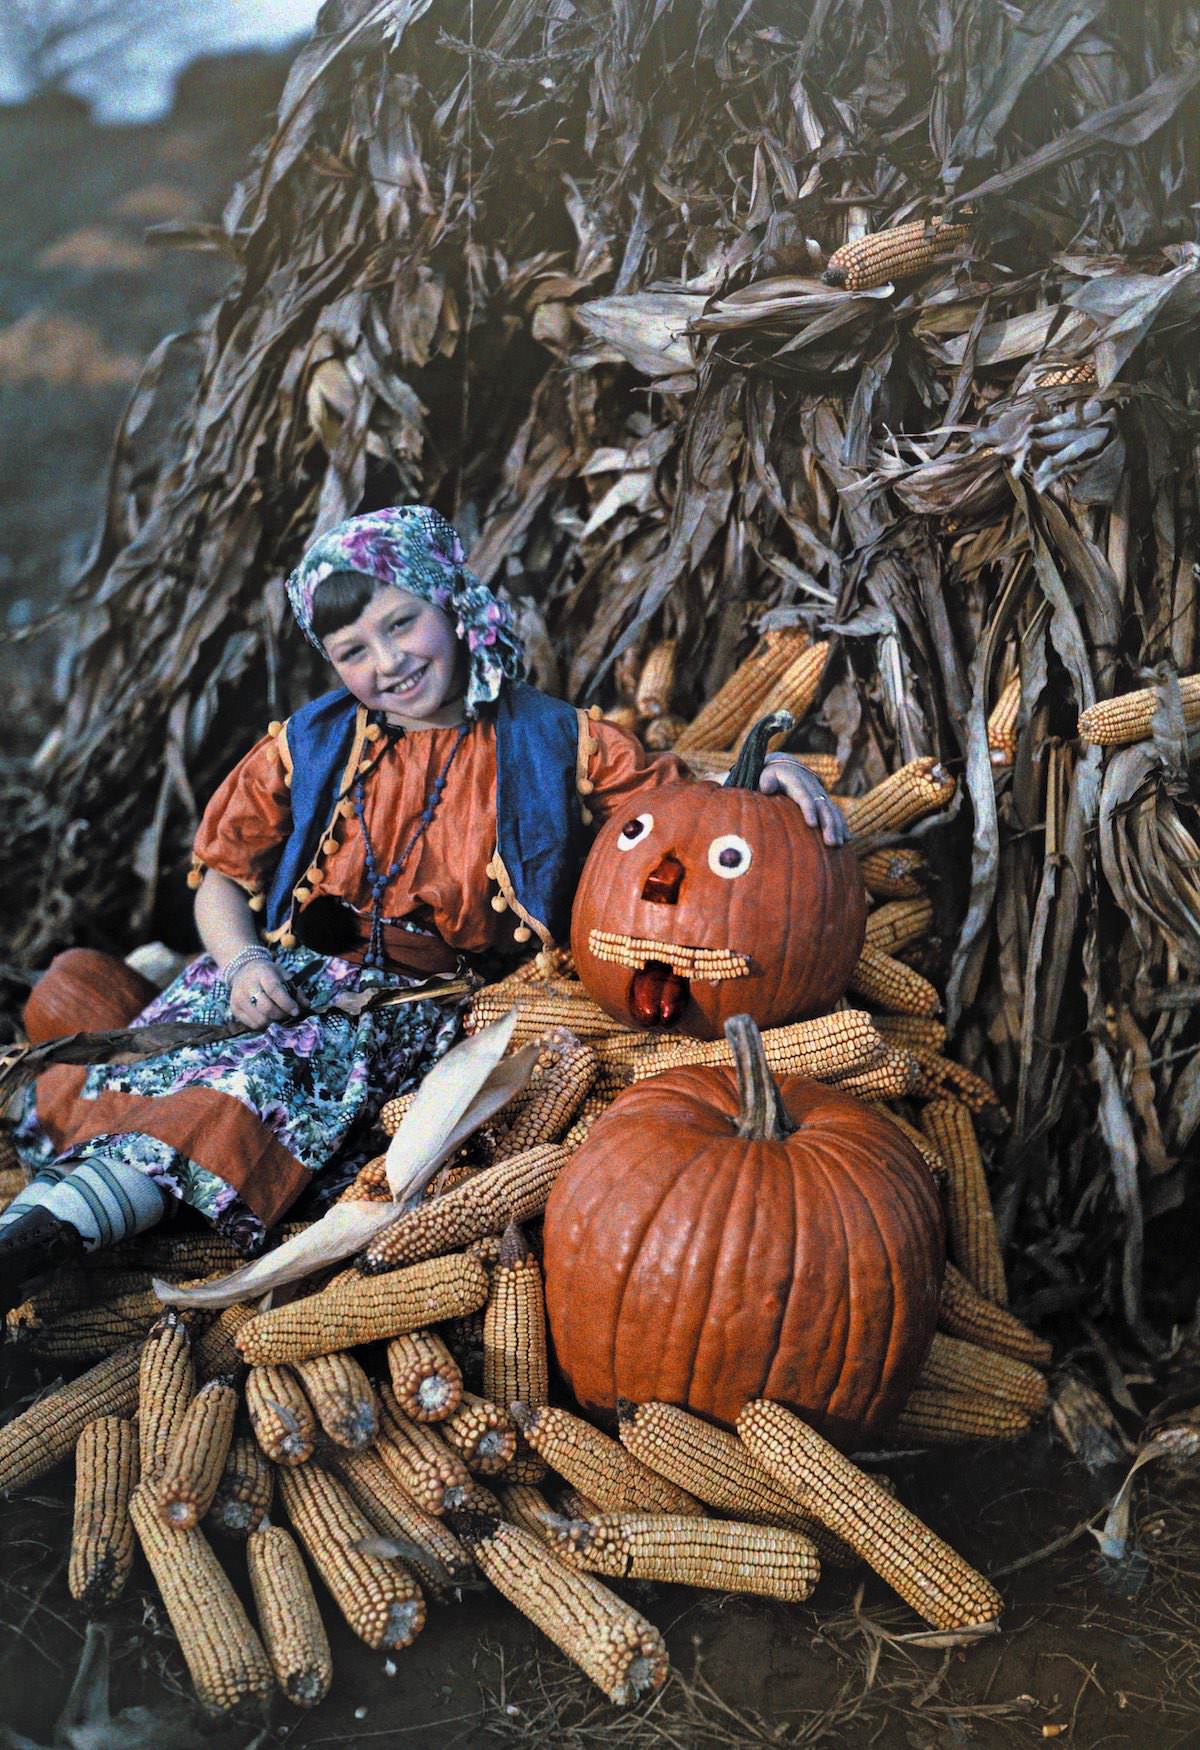 A girl poses with corncobs and pumpkins during the harvest, Virginia.